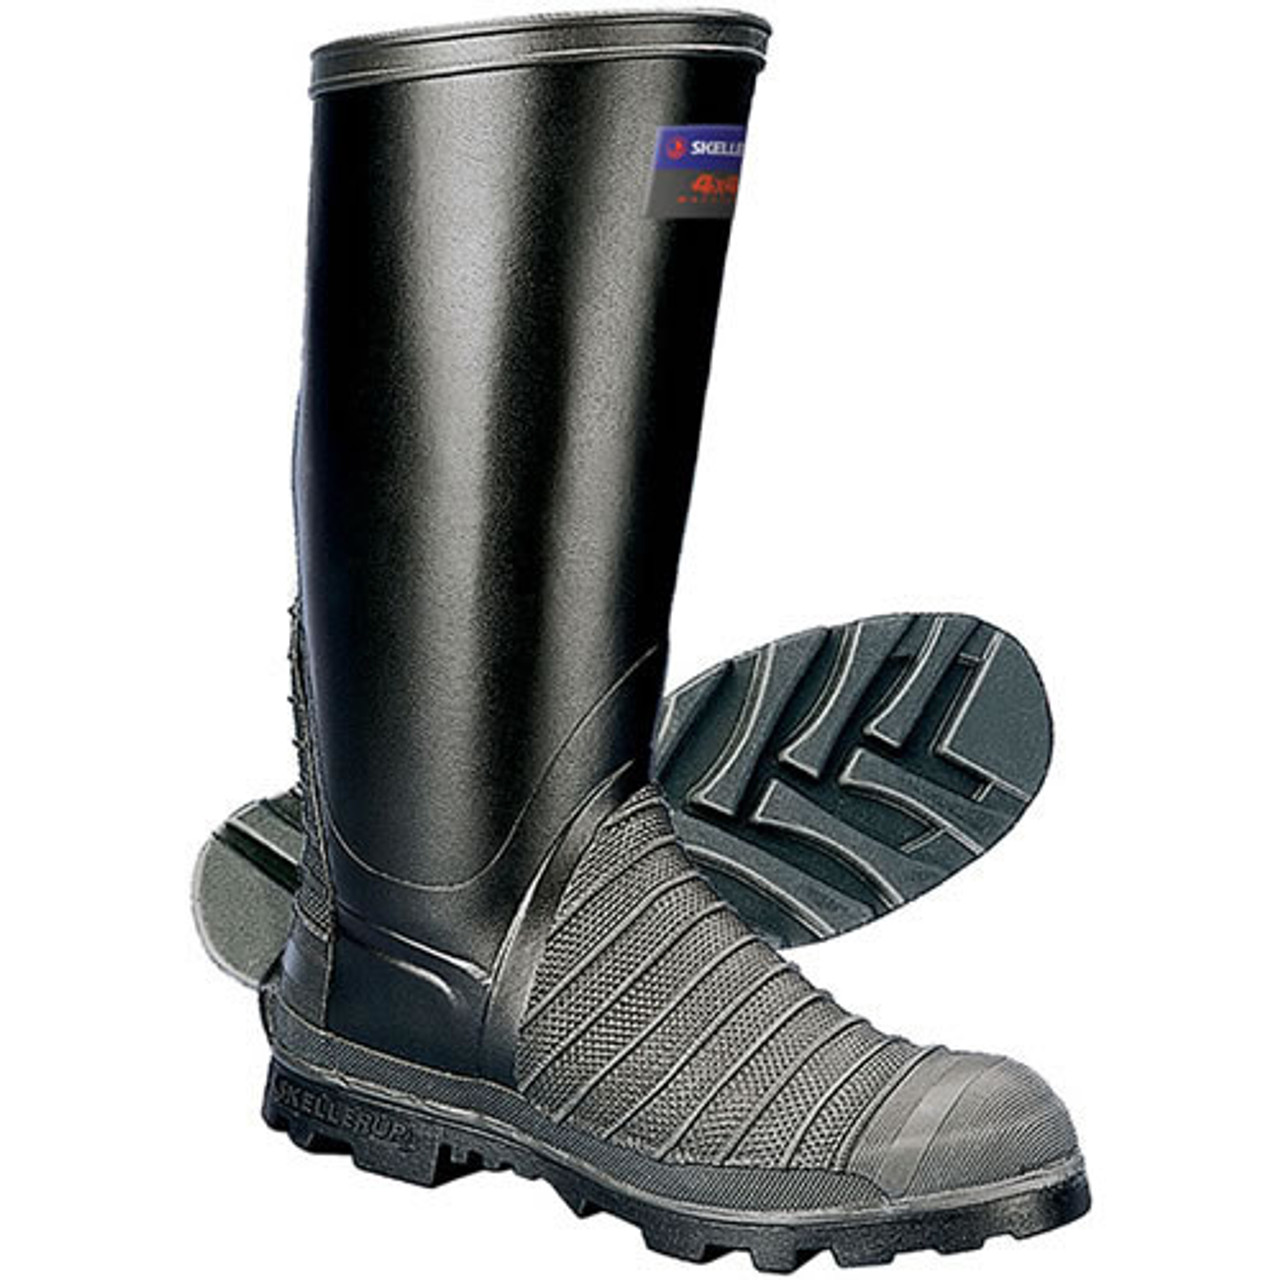 gumboots afterpay